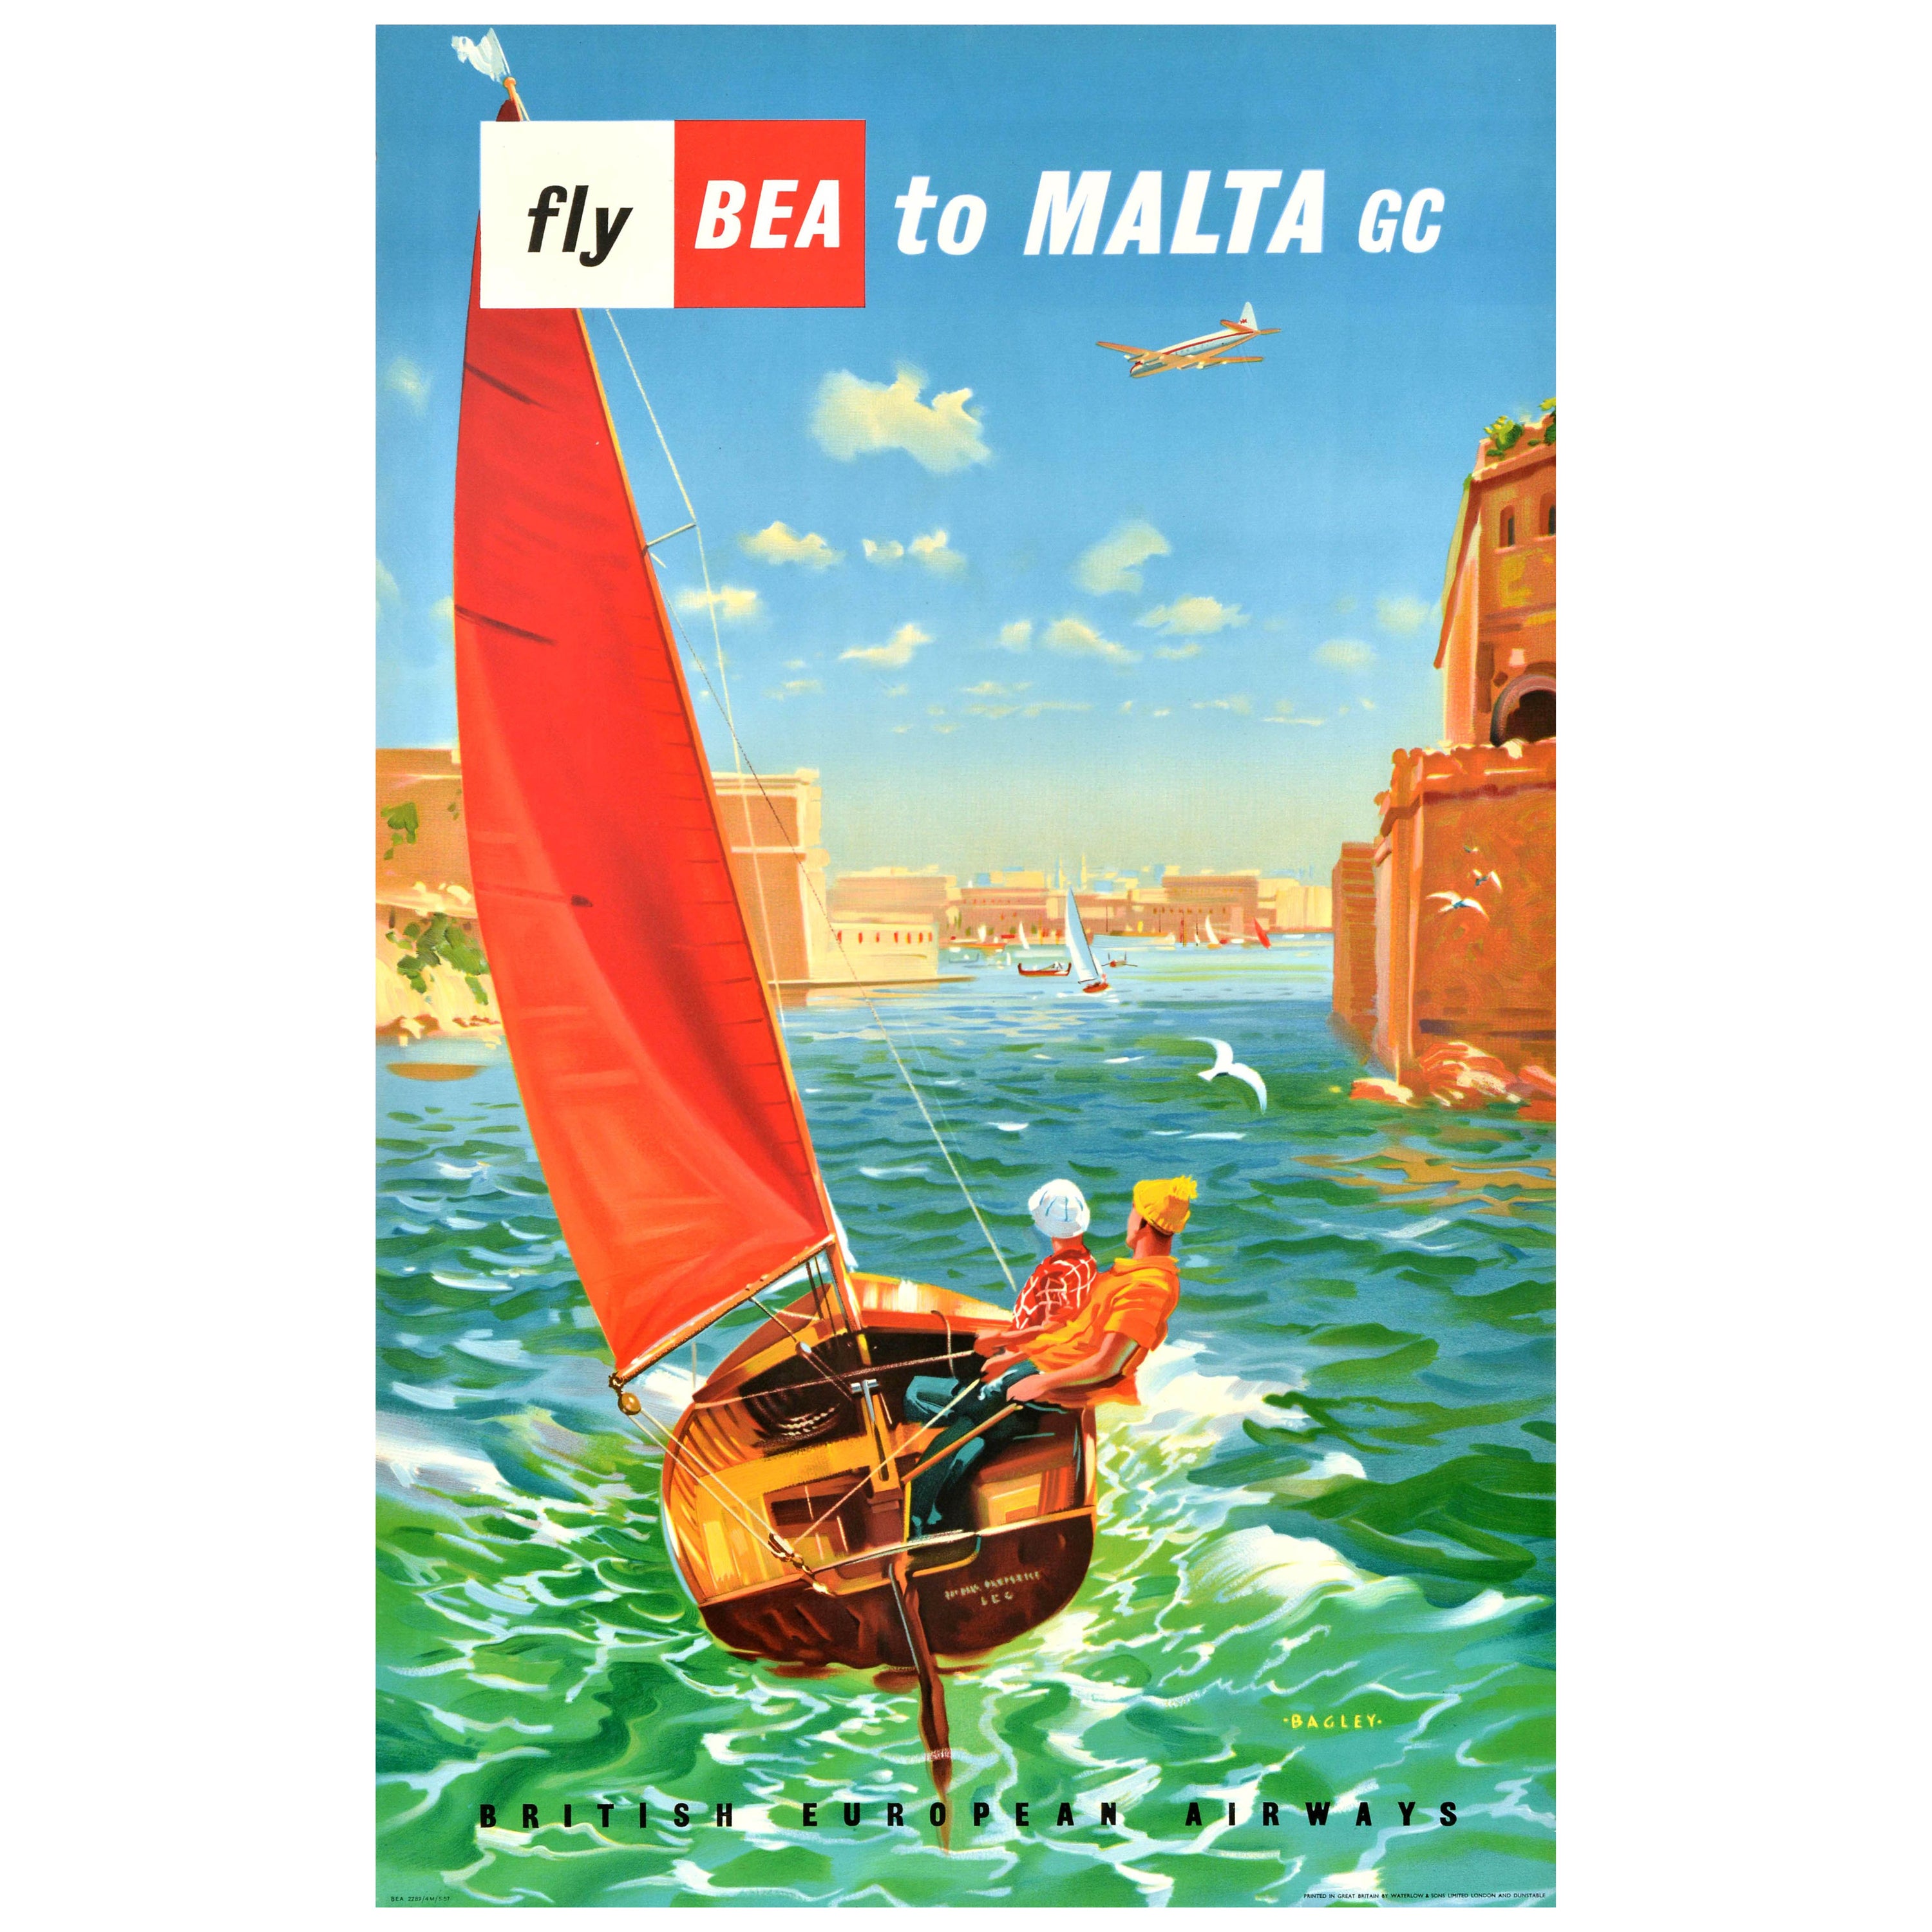 Original Vintage Travel Poster Fly BEA To Malta Sailing Valetta Grand Harbour For Sale